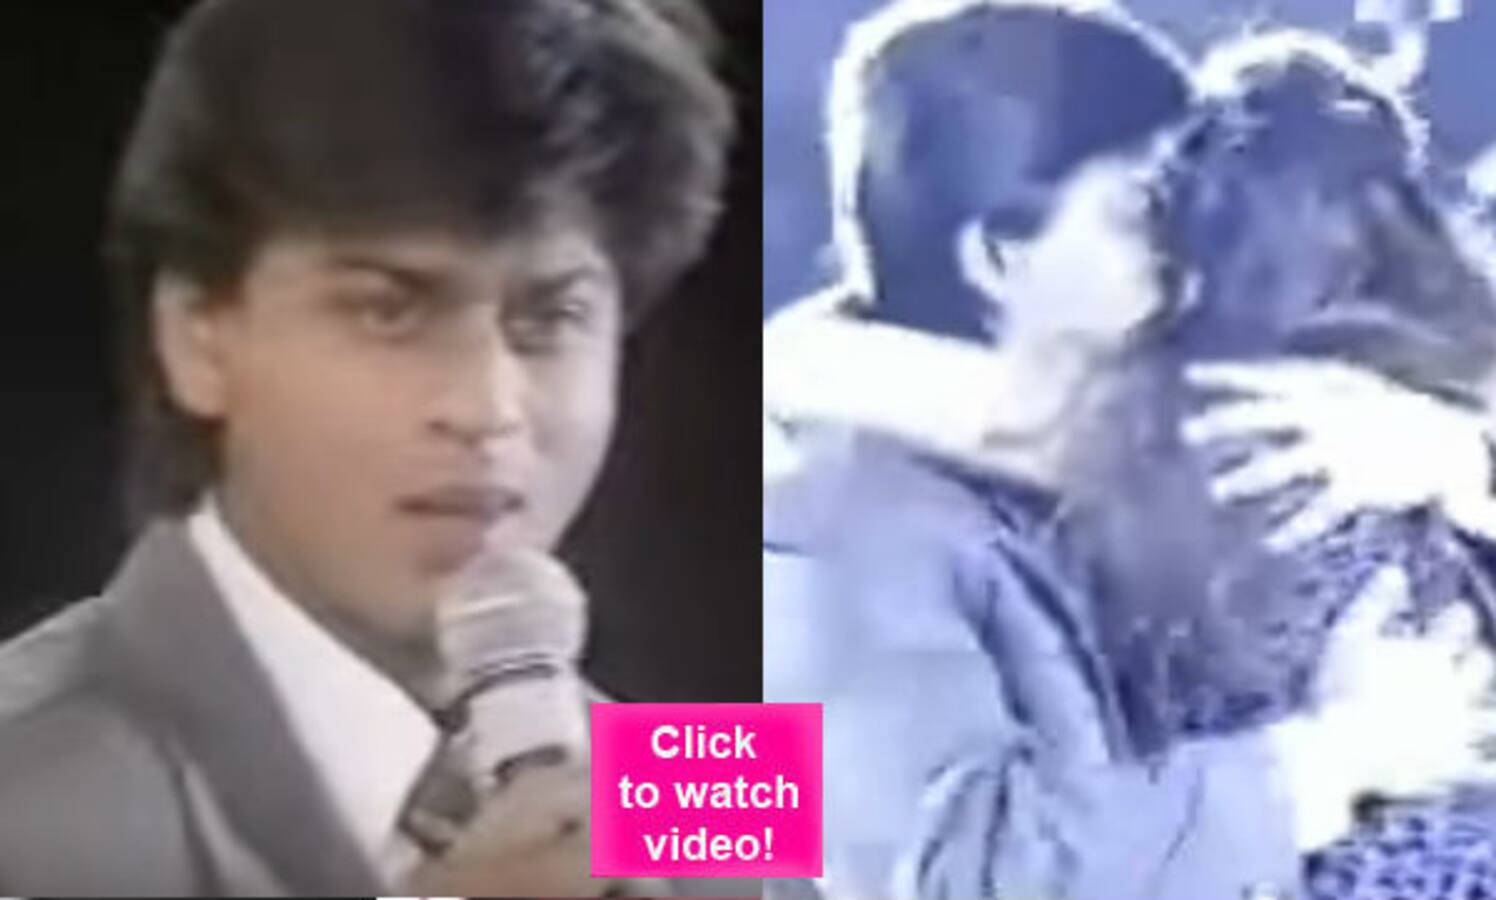 Why was Shah Rukh Khan carrying money to an award ceremony? Watch video